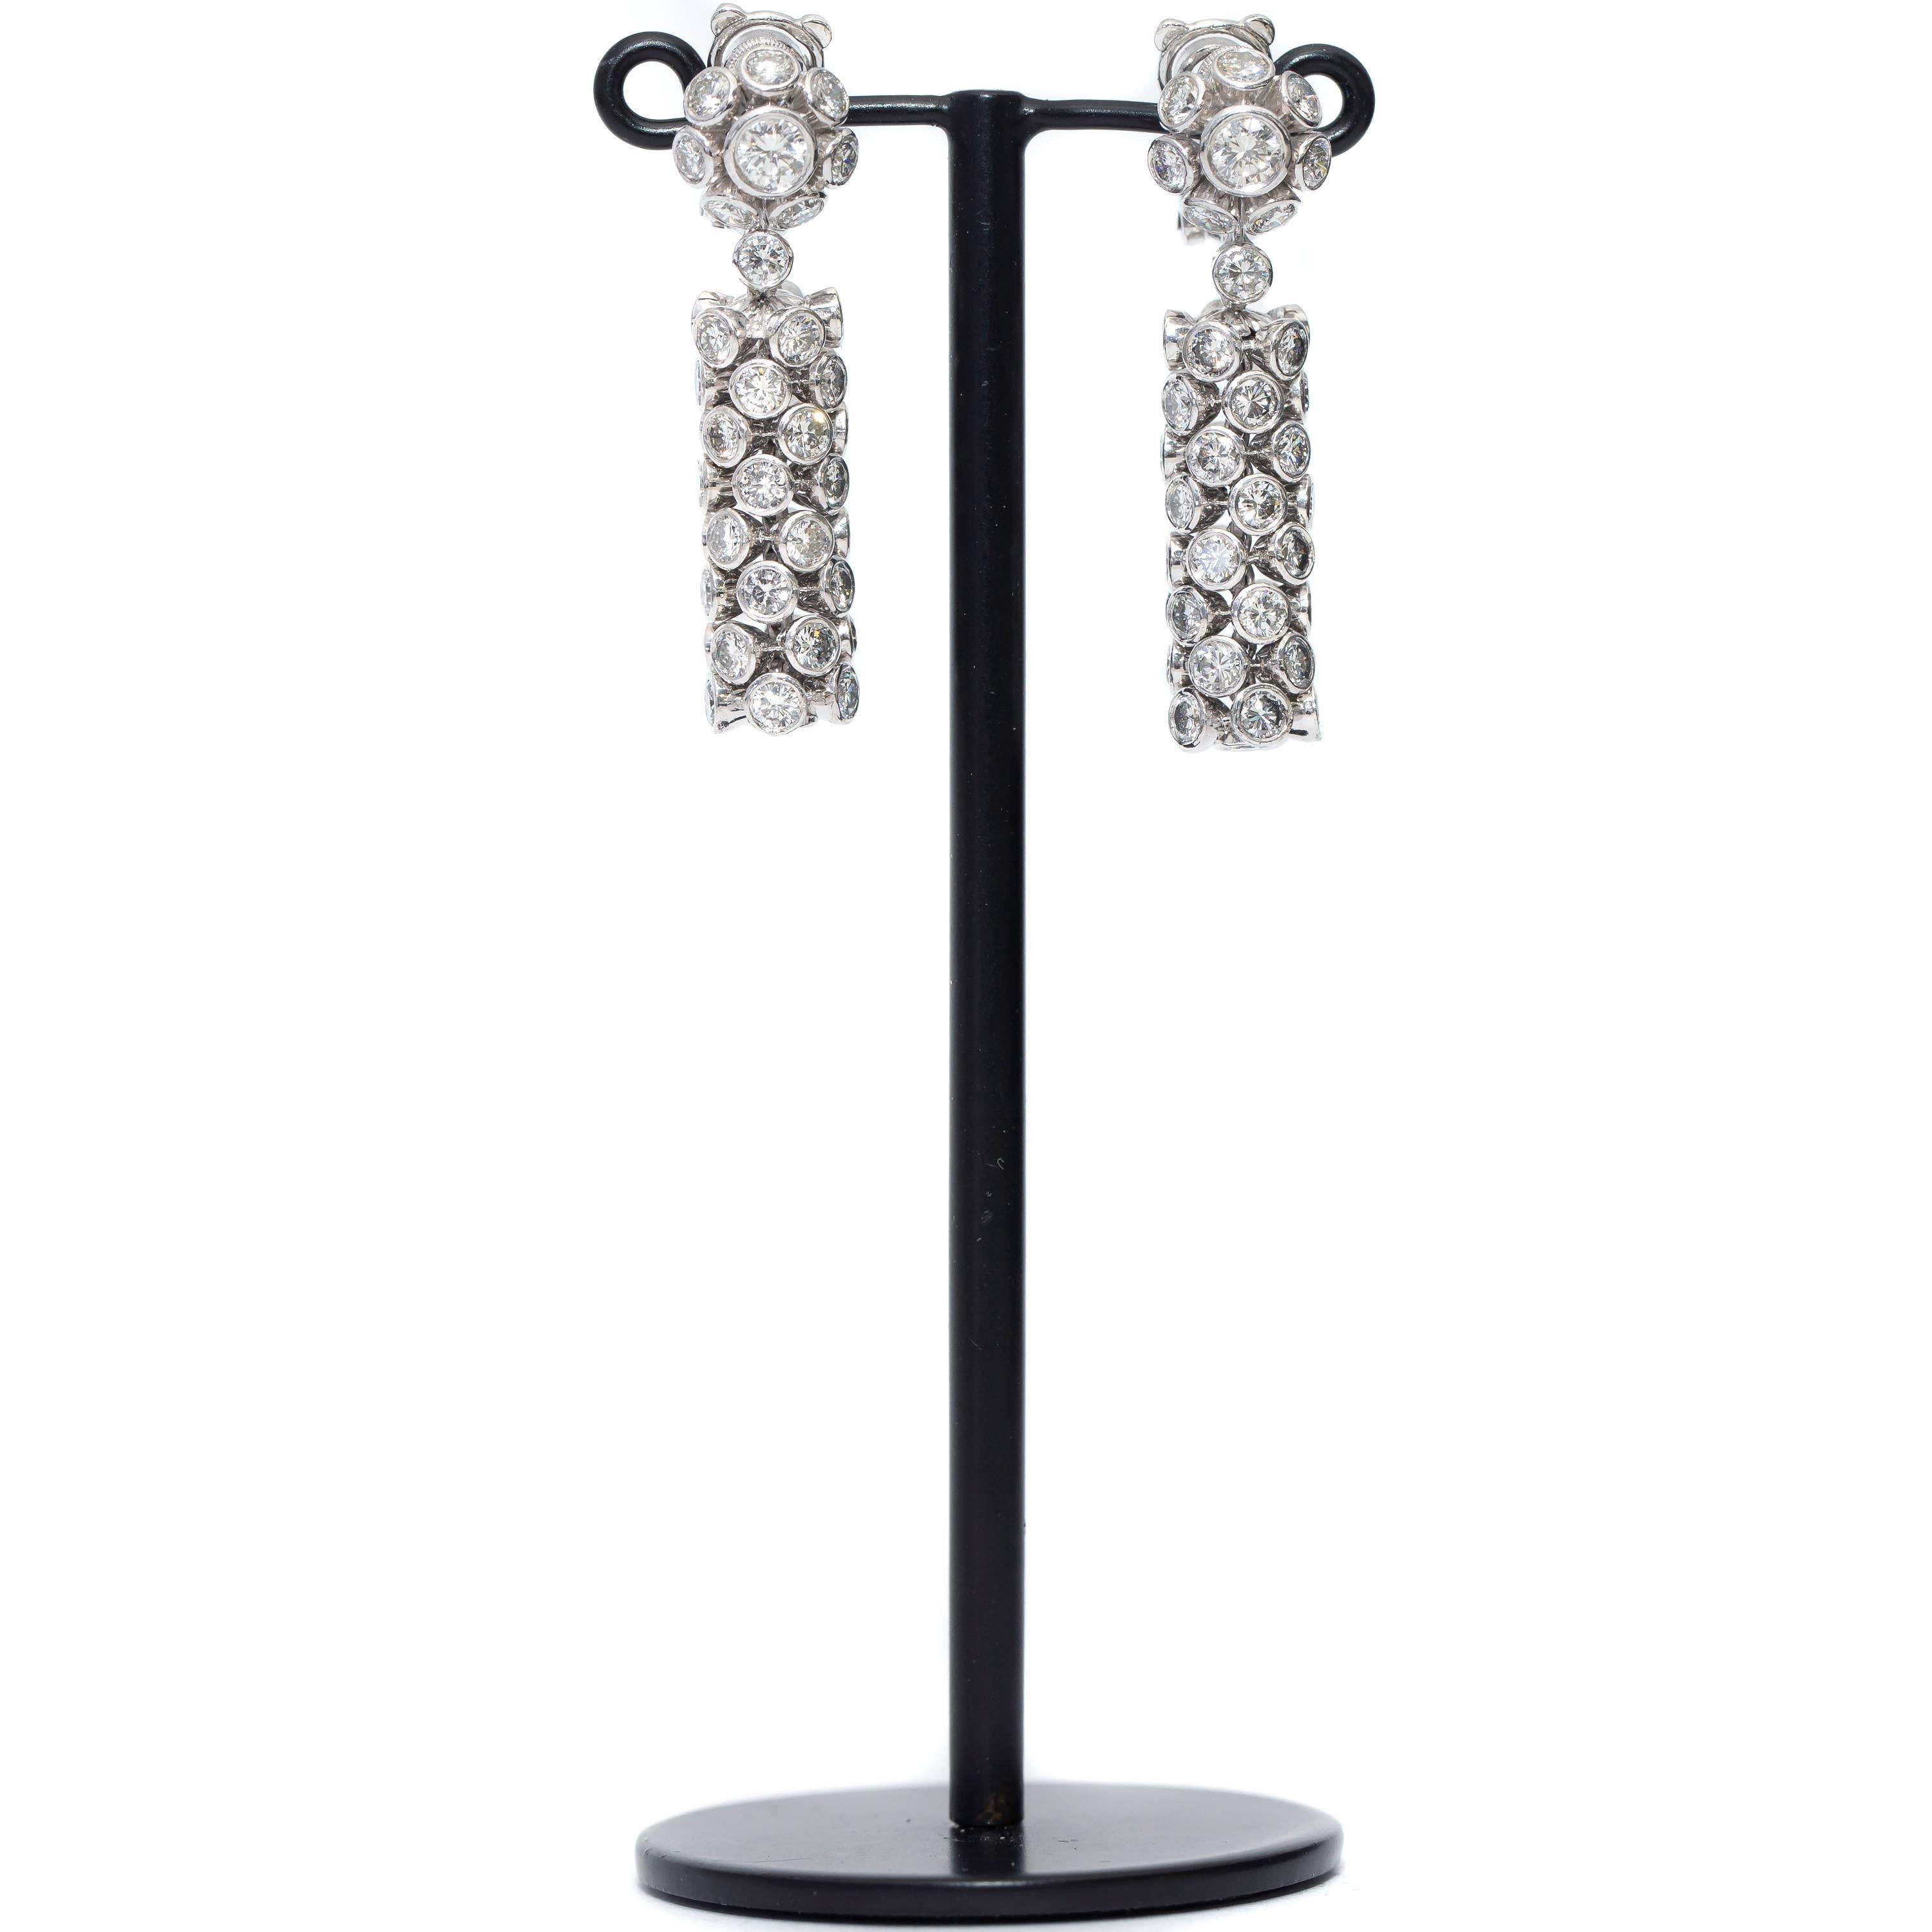 These Spectacular Bezel set Diamond drop earrings featuring 10.00 Carats of sparkling White Diamonds perfect for any occasion beautifully set in 18 Karat White Gold, British Hallmarked. 